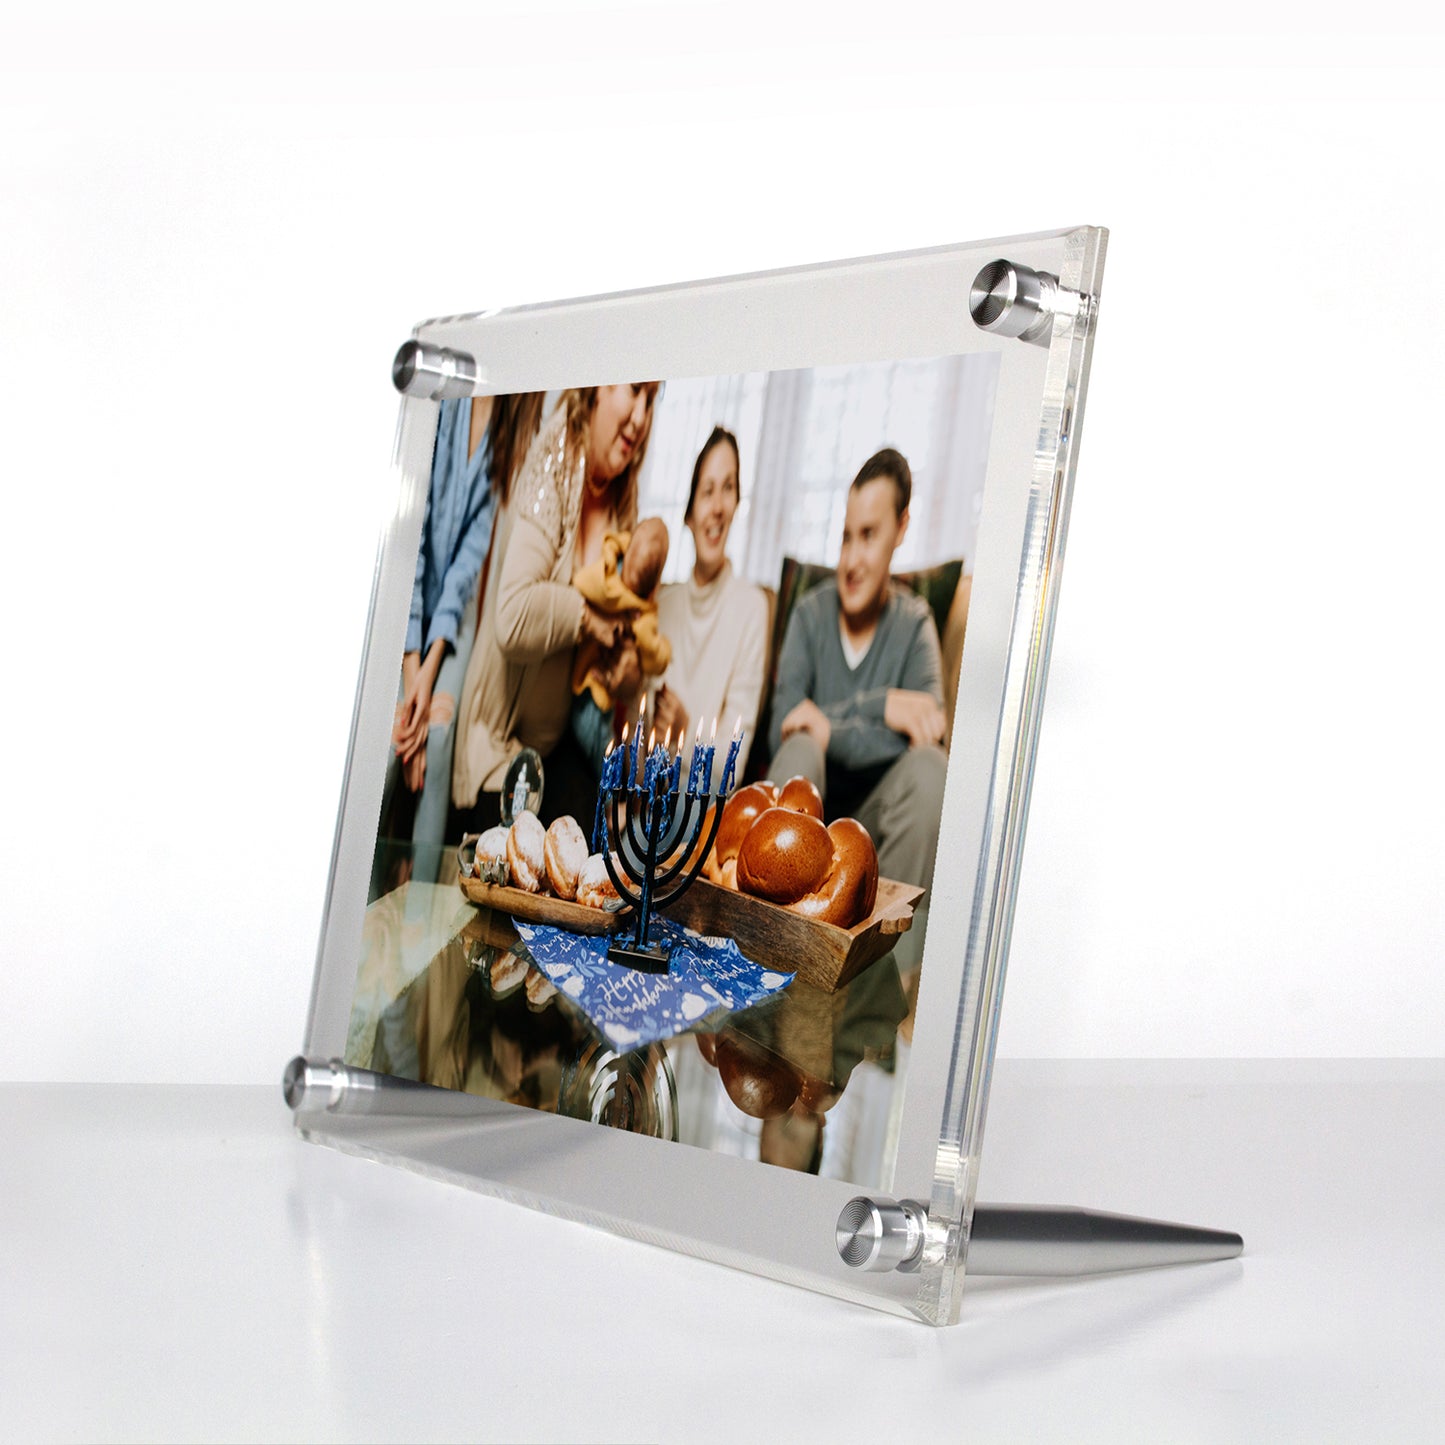 Tabletop Frames: Easy, Thoughtful Gifts for Everyone!